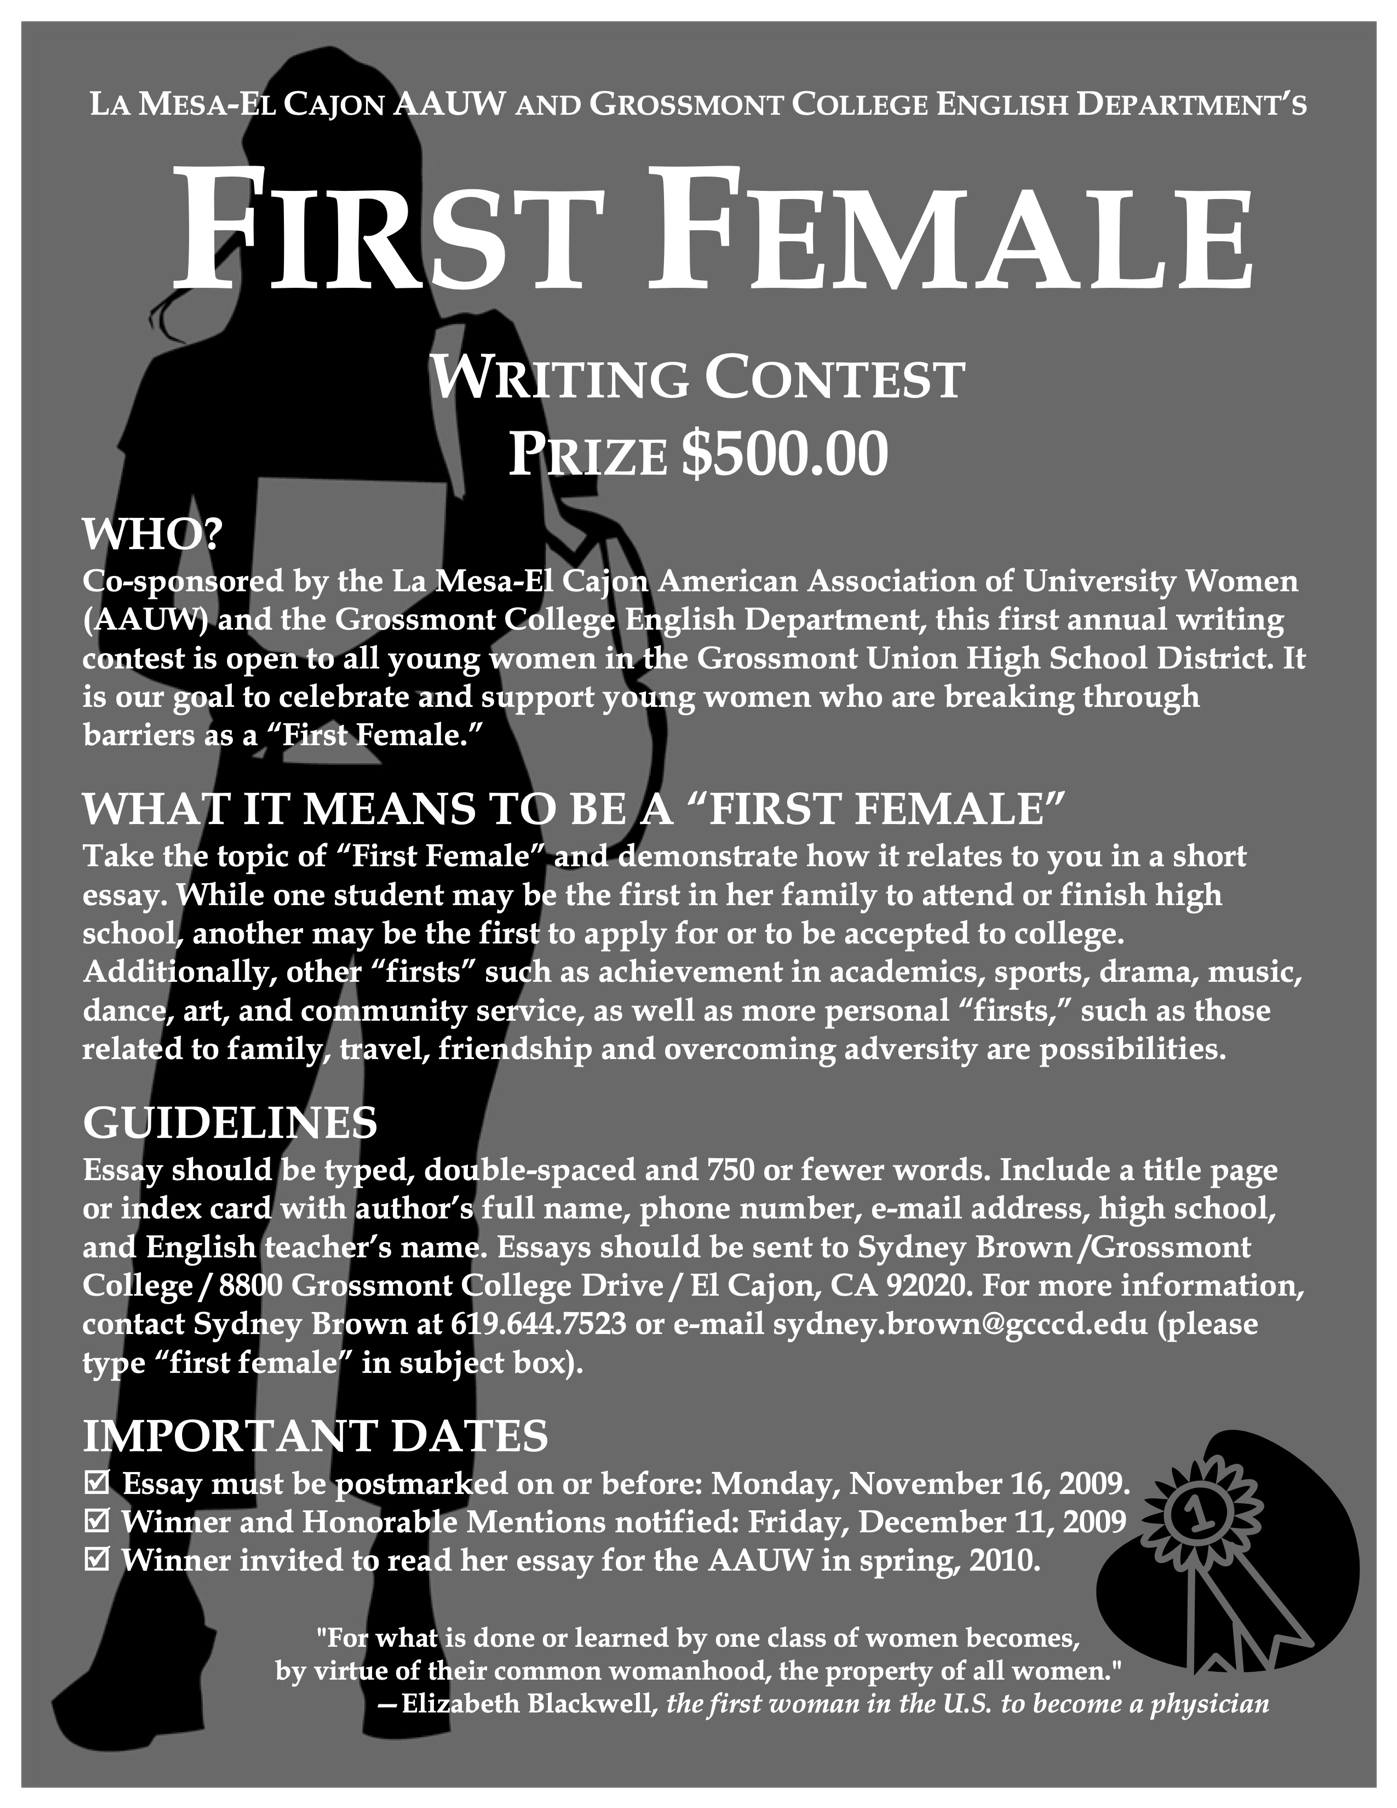 2009 First Female Contest flier